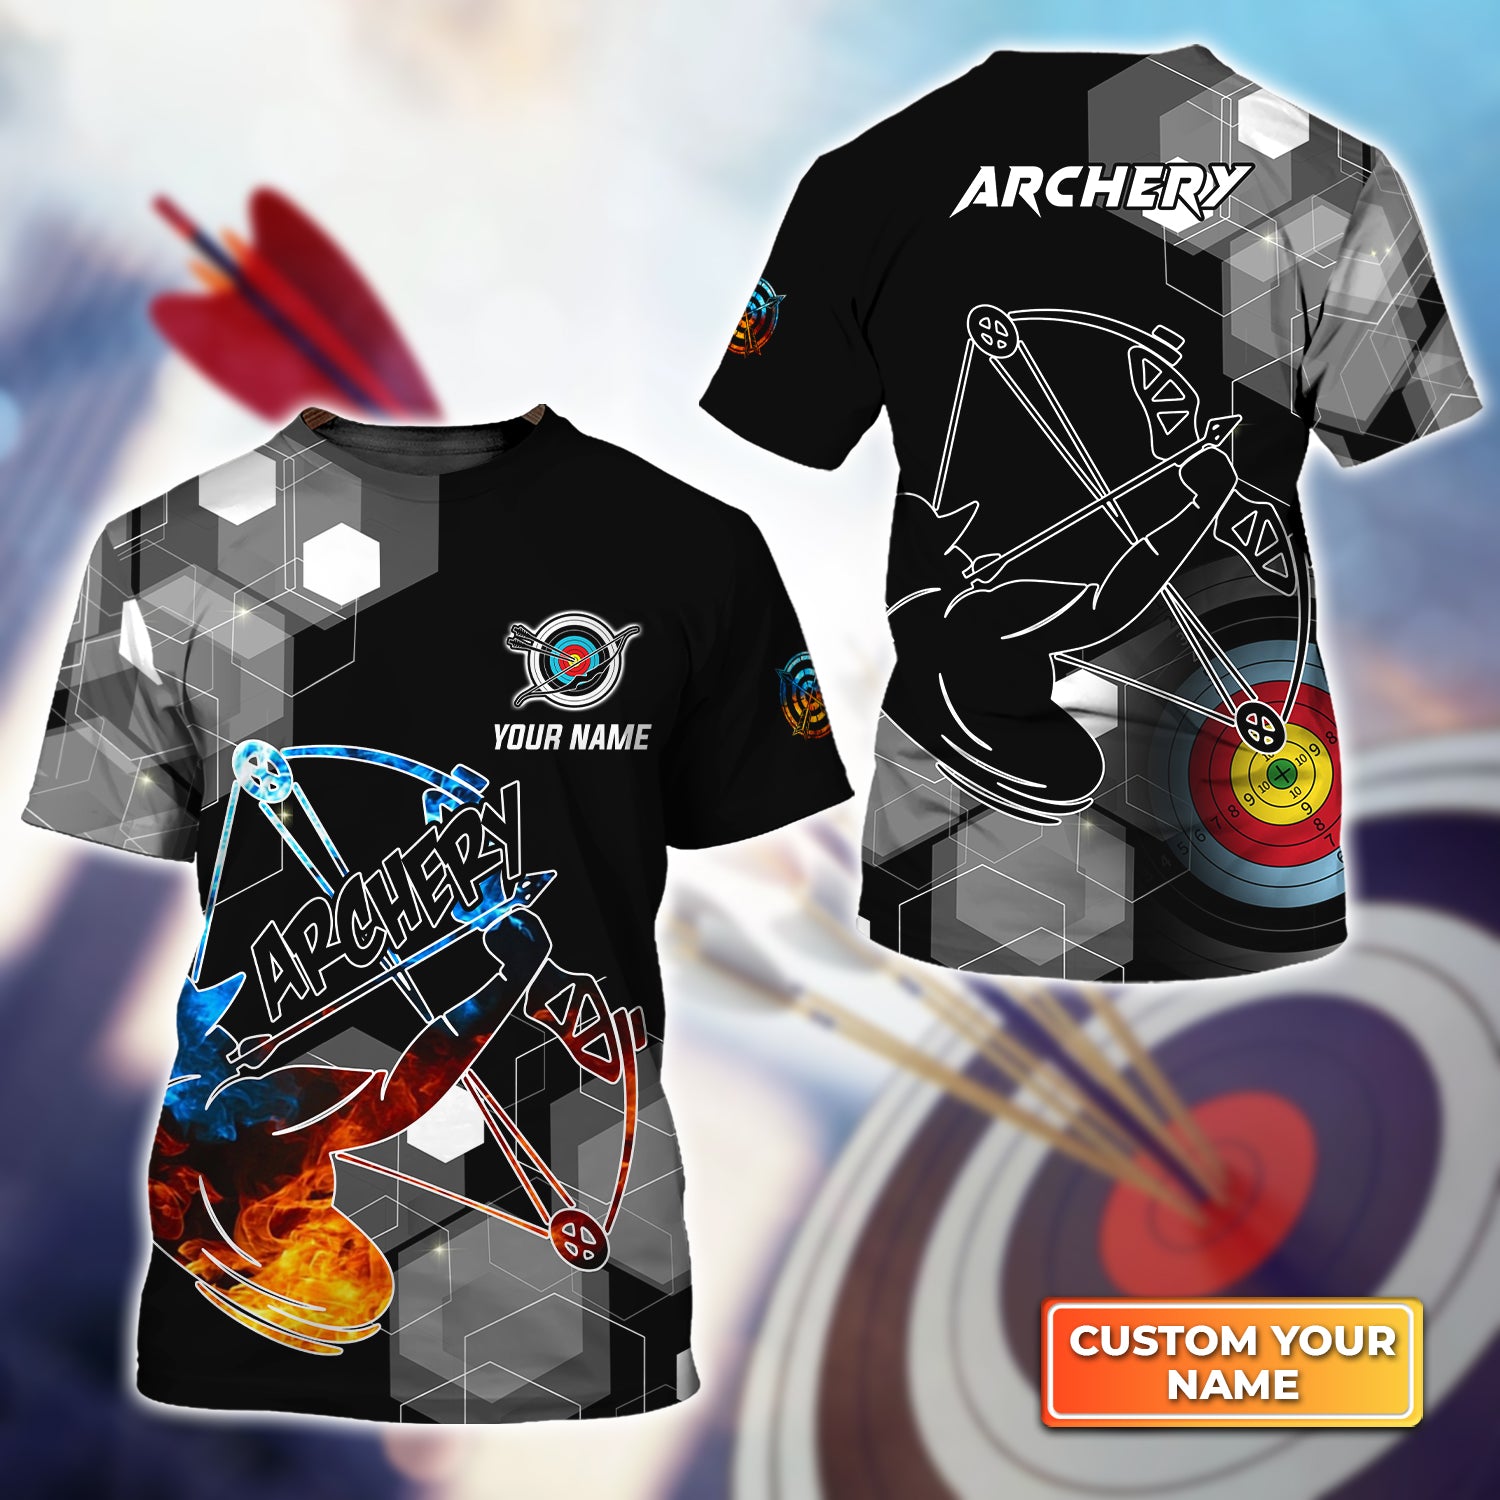 Archery Summer Short Sleeve Shirts Personalized Name 3D Target Bow T-Shirt QB95 Gift For Archer Sport Lovers